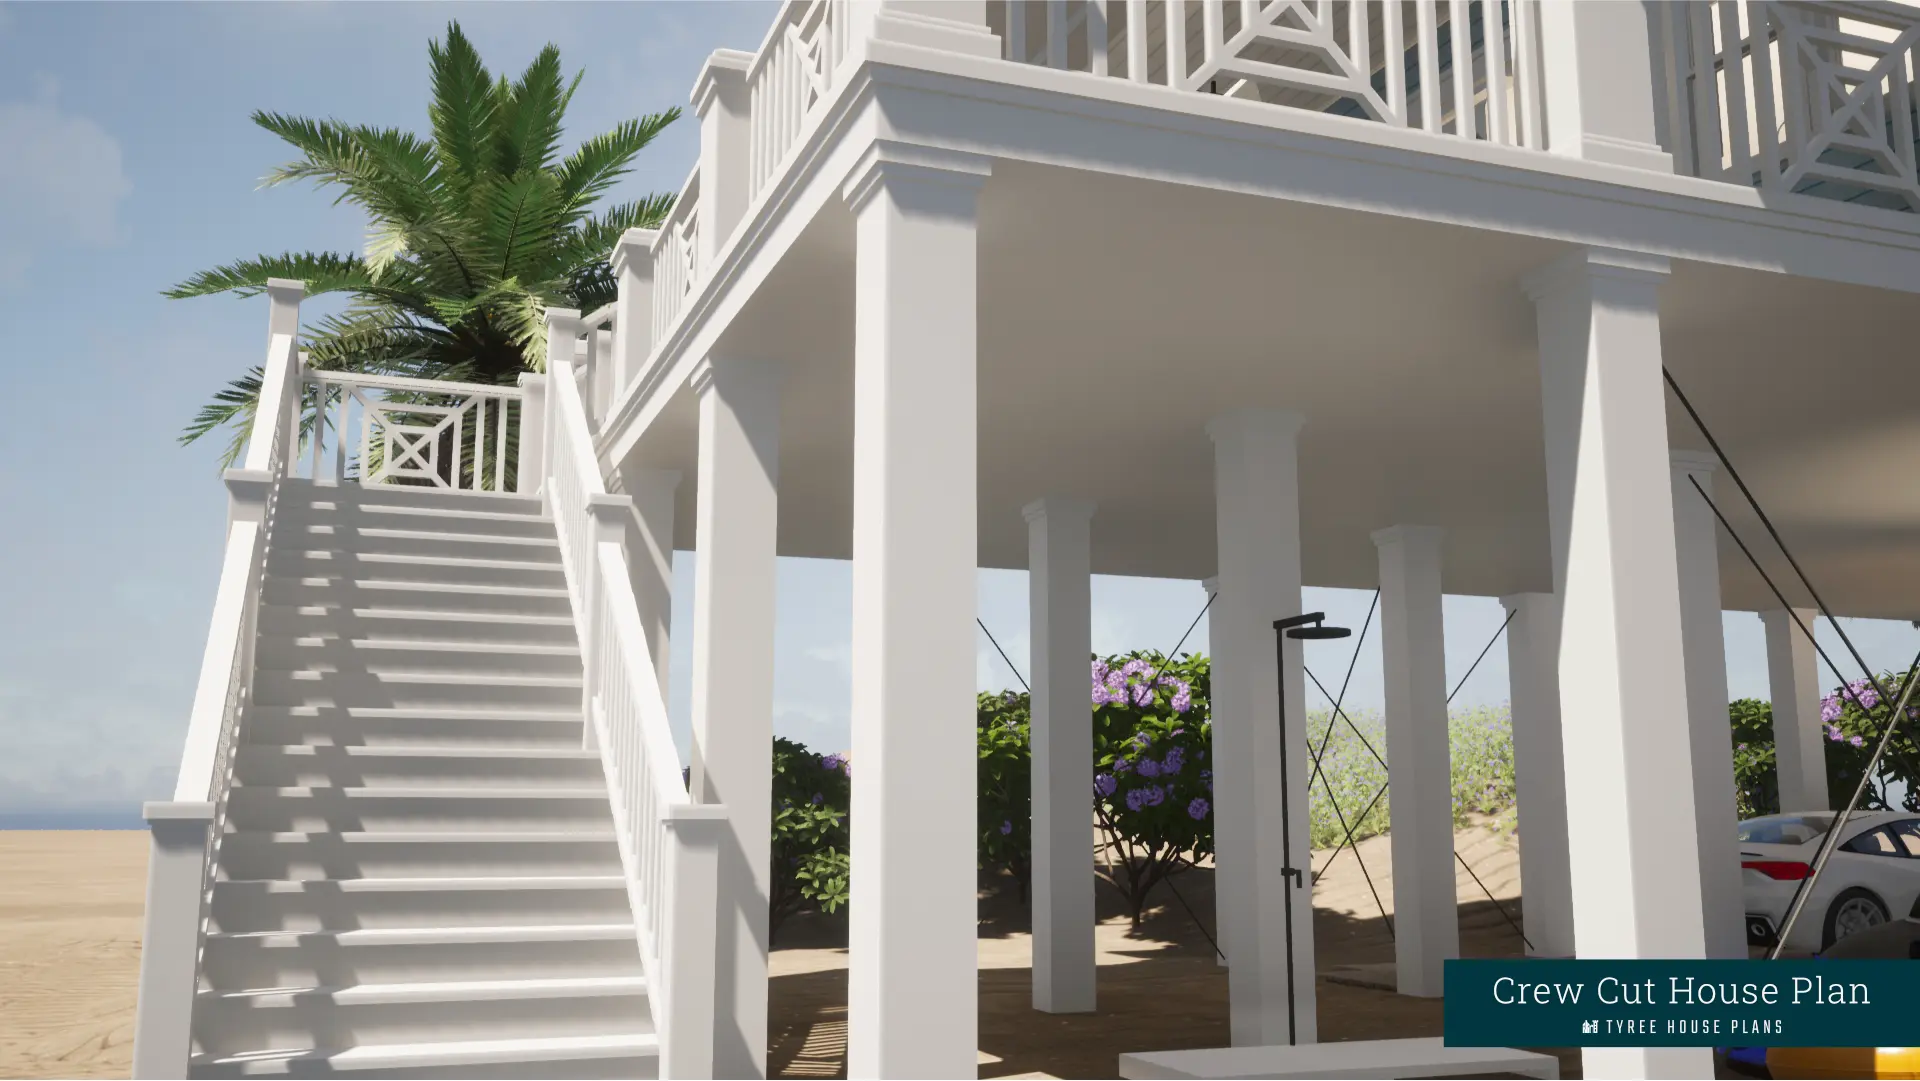 Stairs to sundeck and porch with outdoor shower below. Crew Cut by Tyree House Plans